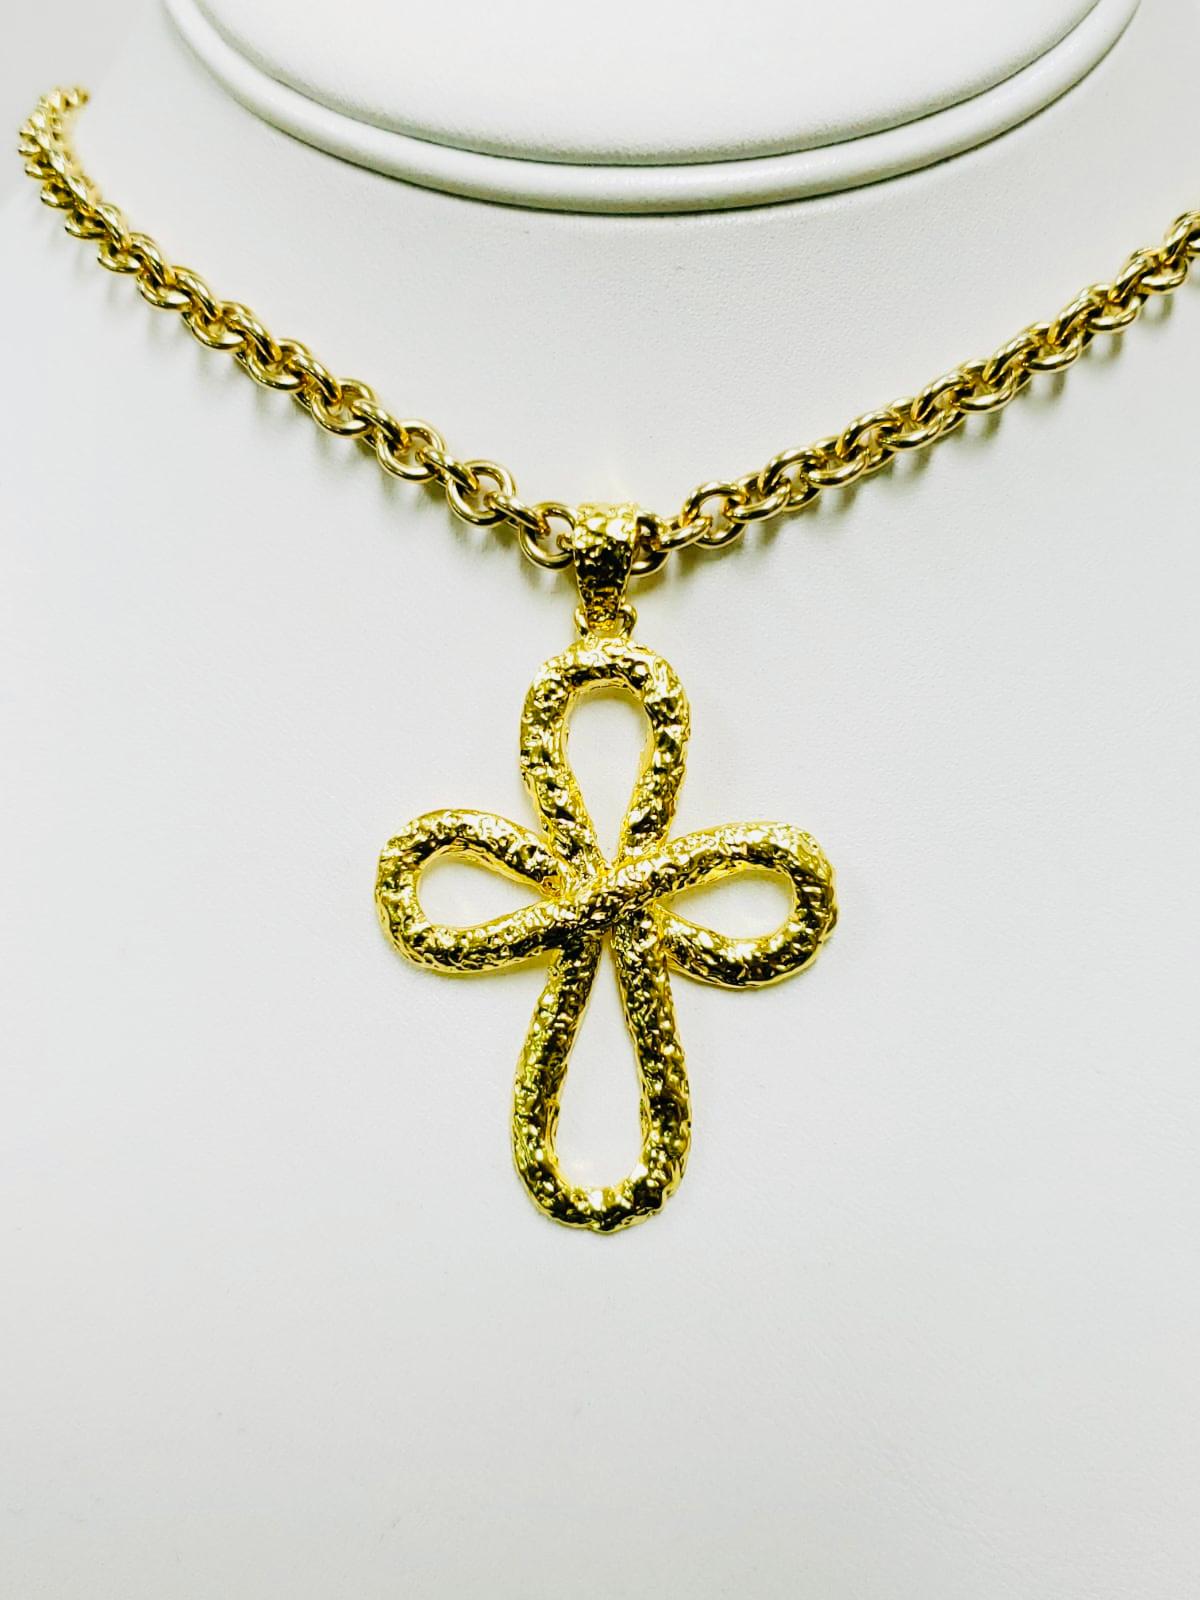 22k Gold Infinity Cross Pendant Necklace In New Condition For Sale In New York, NY